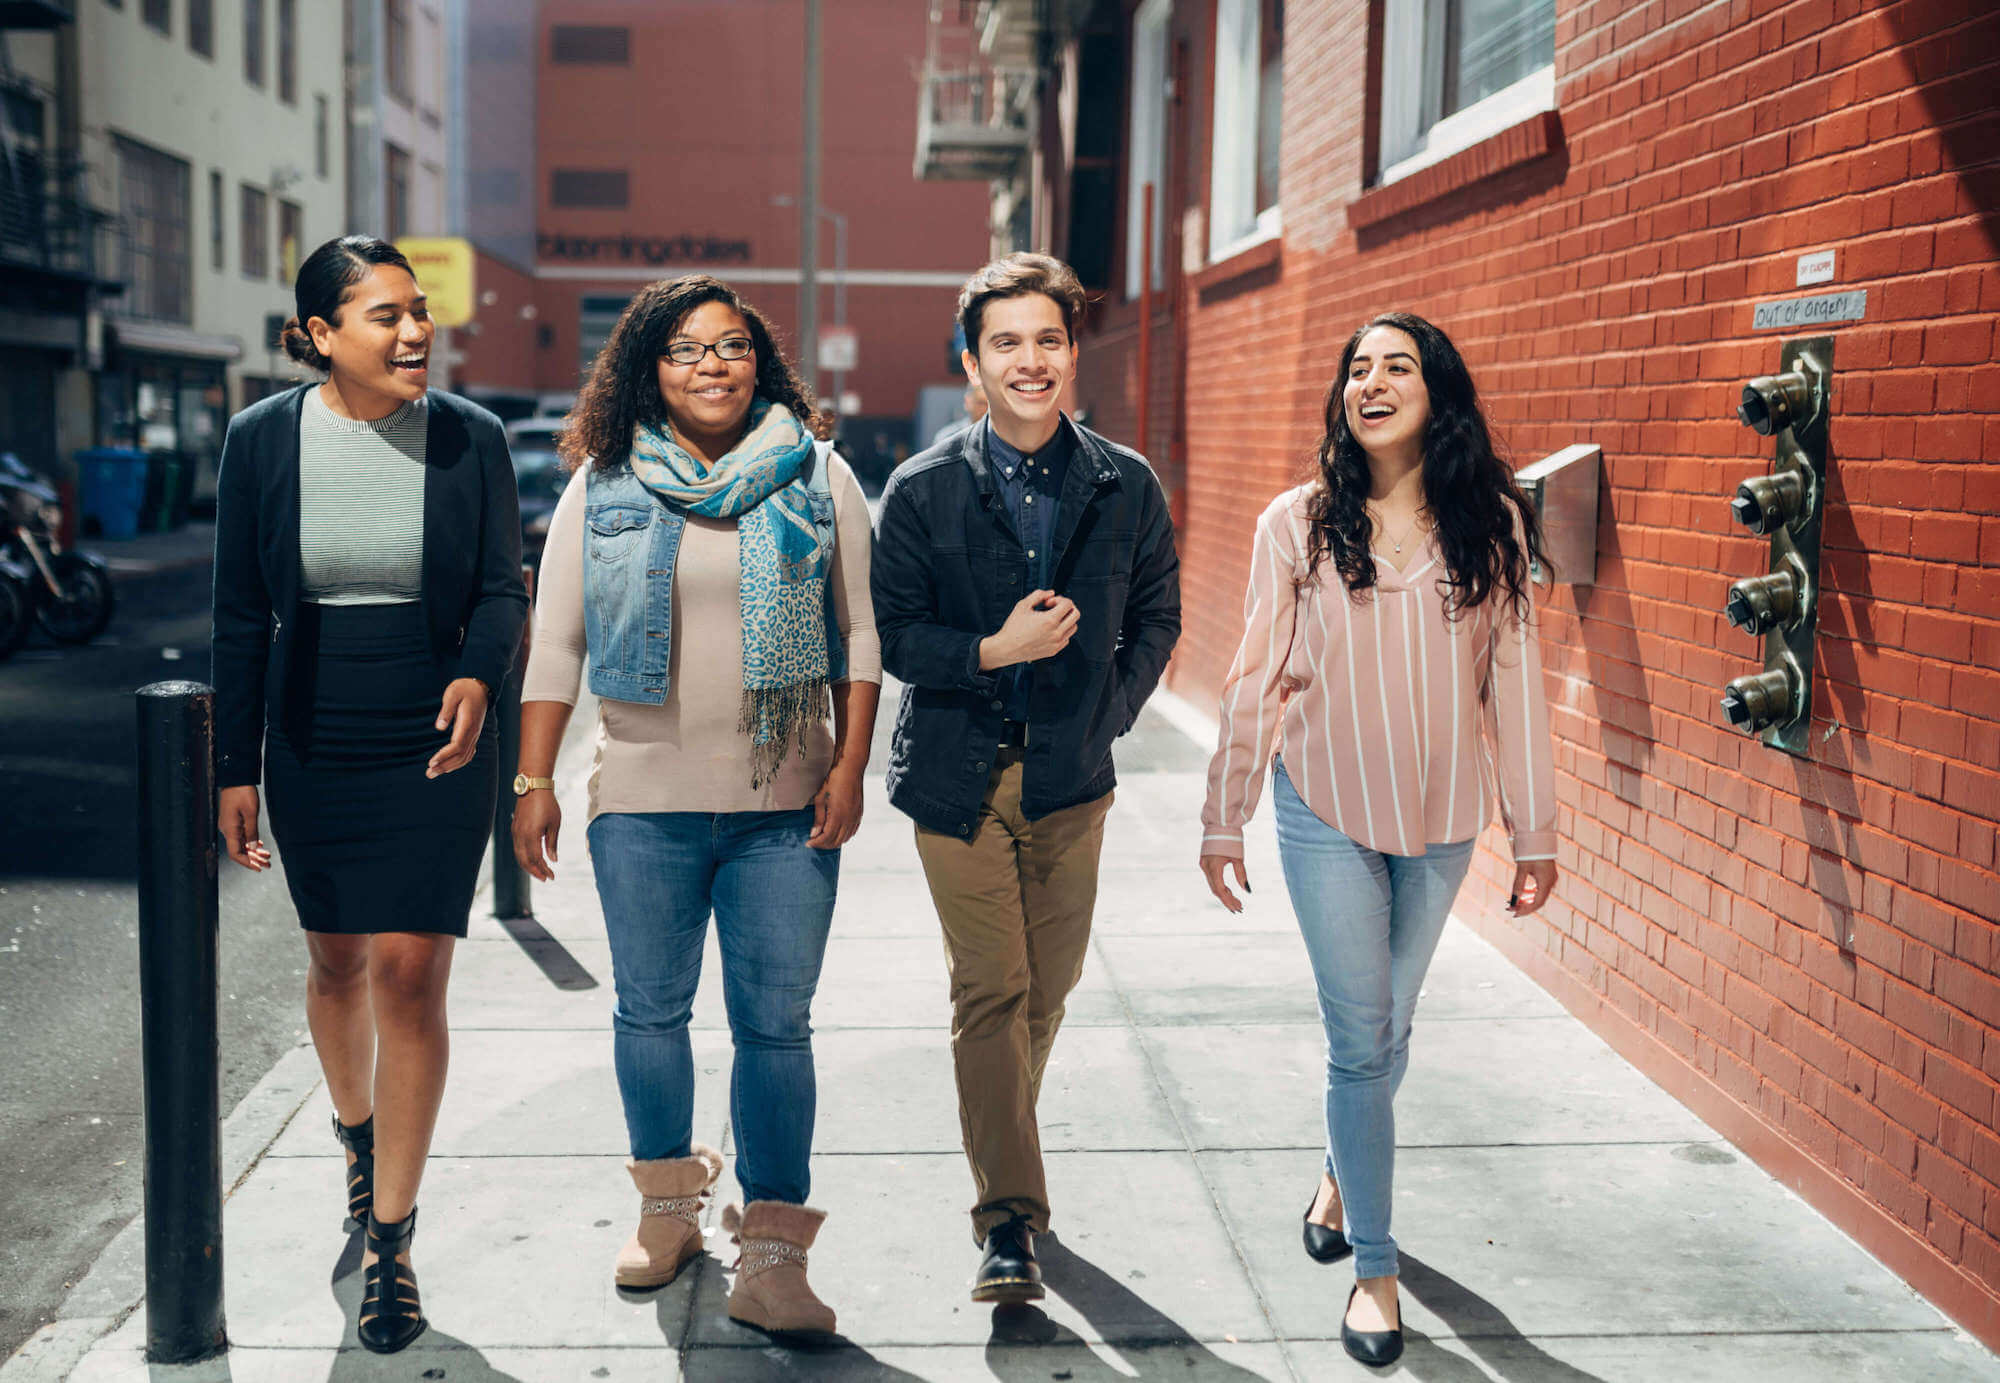 Four young people walking along a sidewalk